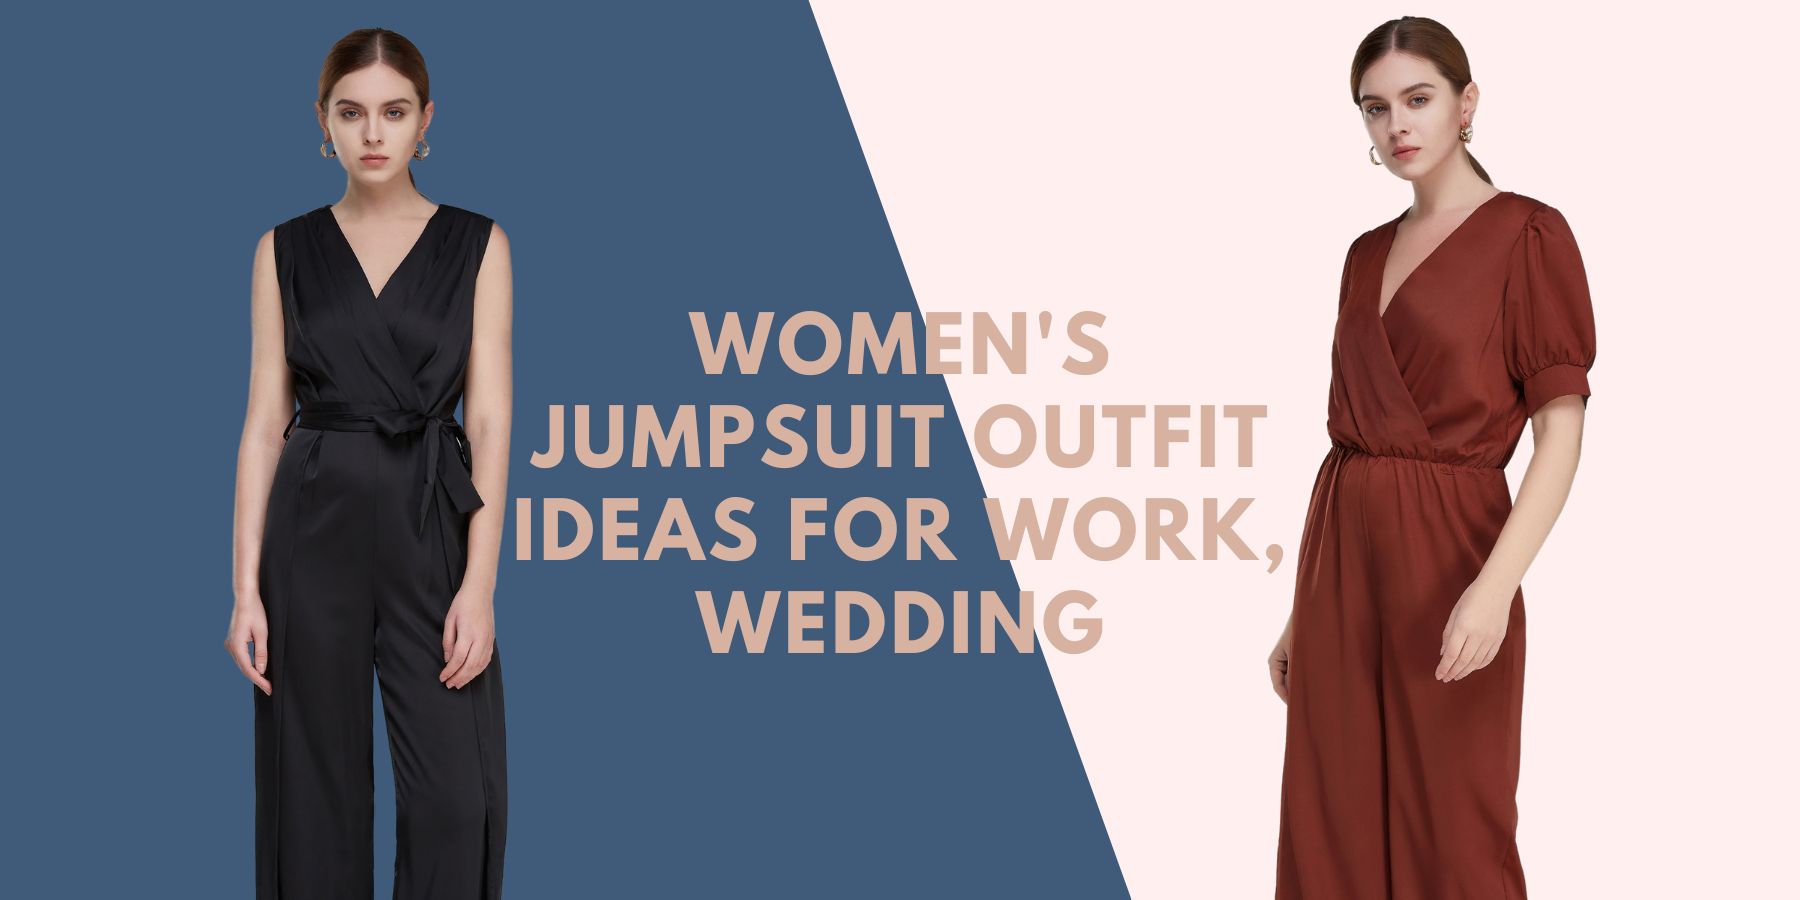 Women's Jumpsuit Outfit Ideas for Work, Wedding